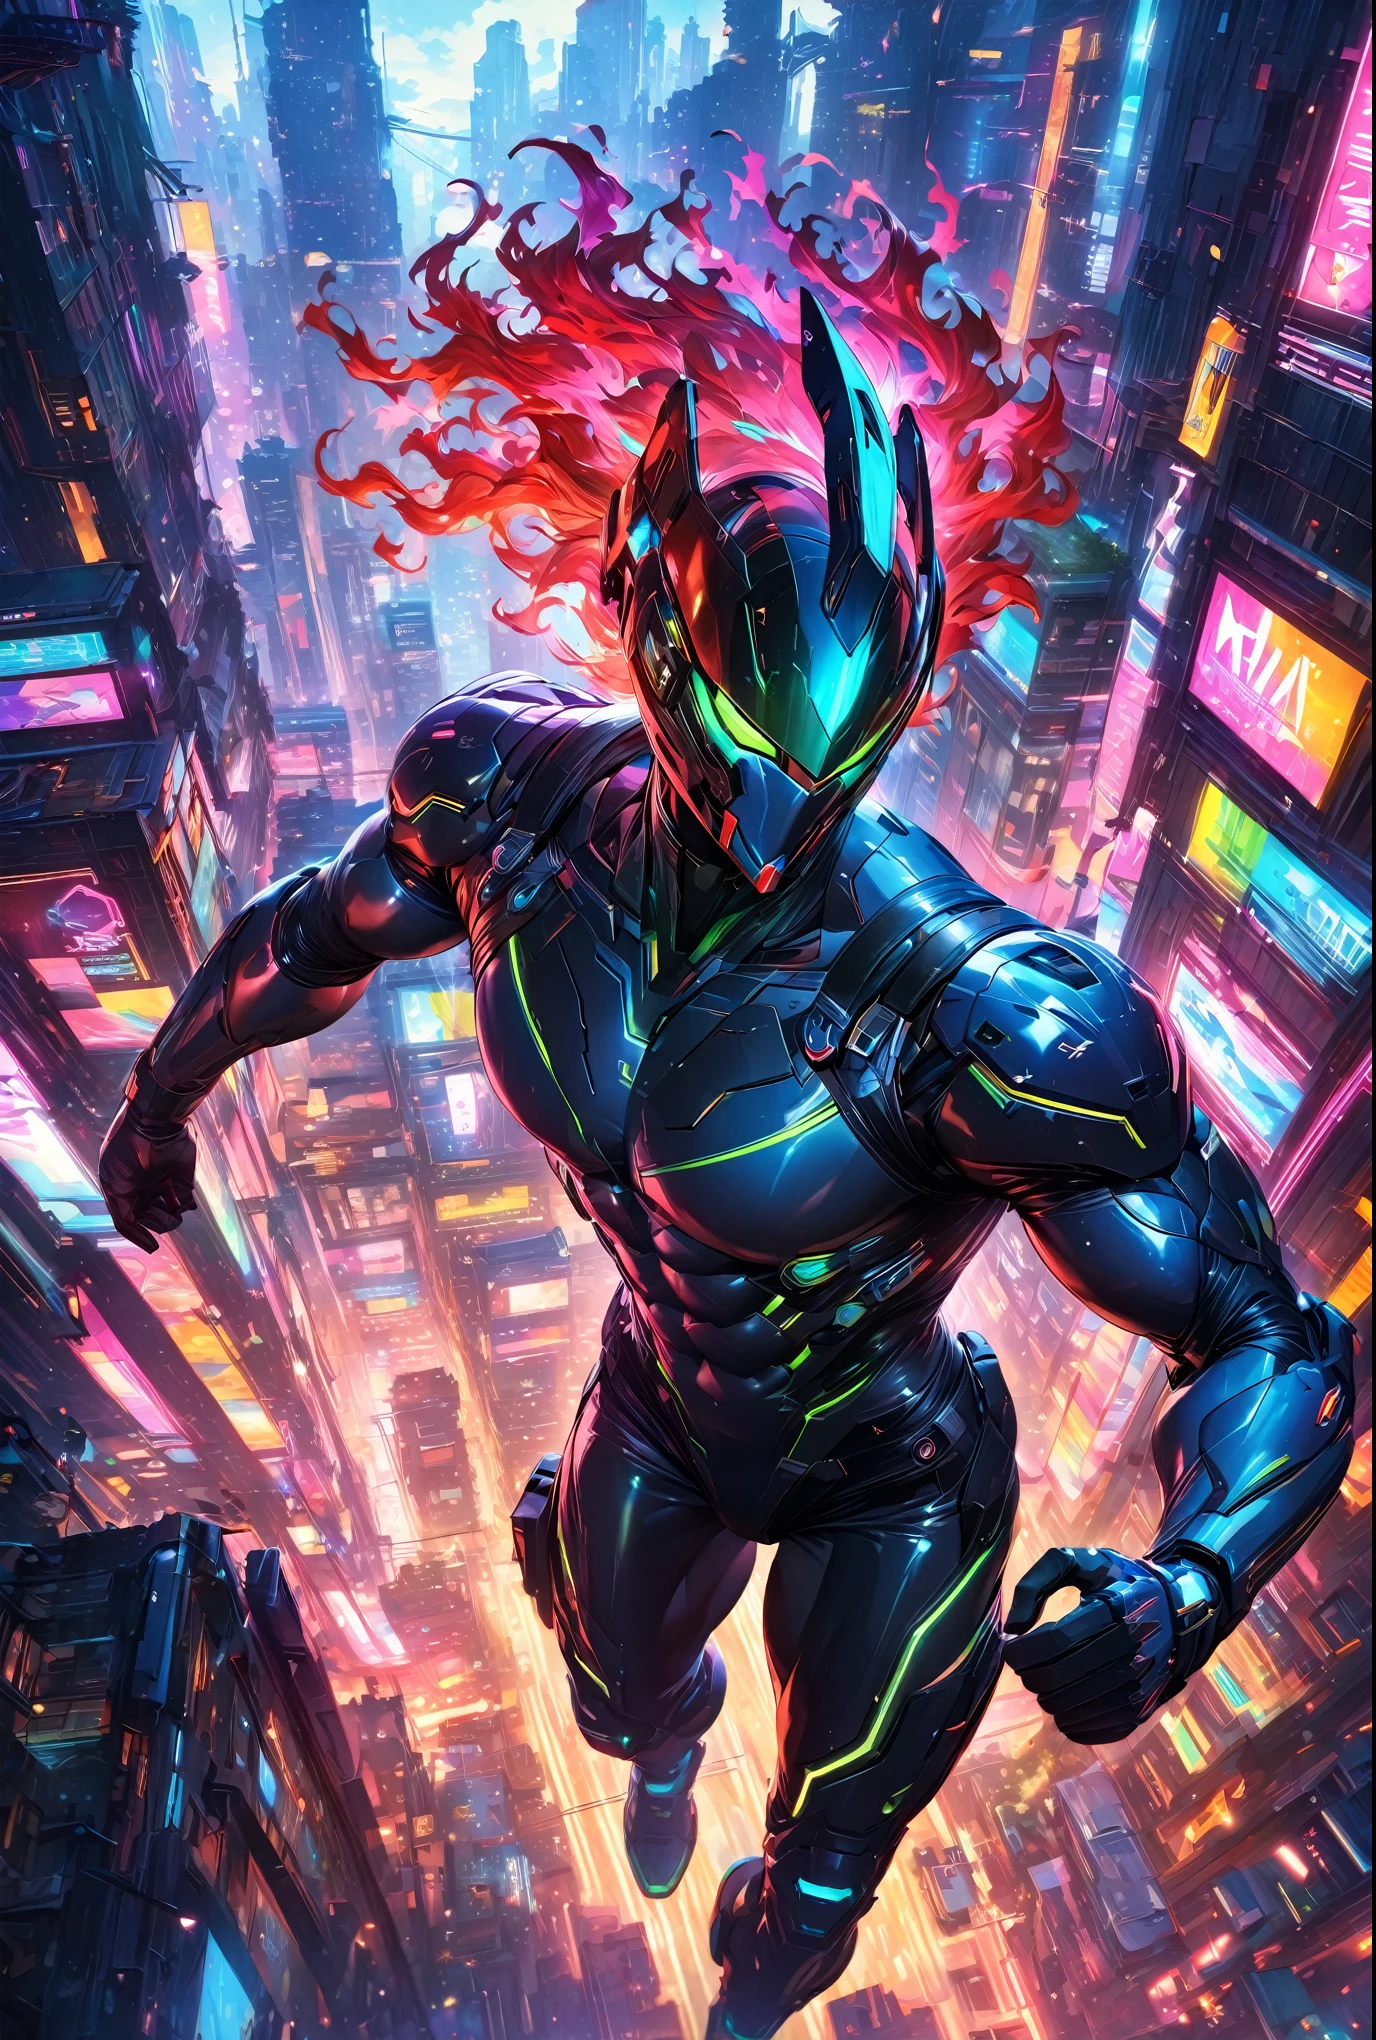 ,(masterpiece:1.3),(highest quality:1.4),(ultra detailed:1.5),High resolution,extremely detailed,unity 8k wallpaper,"A handsome man wearing a sleek, body-hugging combat suit in a cyberpunk setting. The suit is crafted from high-durability, lightweight materials, featuring an ergonomic design with vibrant neon lines and patterns in a variety of colors, including electric blue, neon green, fiery red, and bright purple, all tracing the contours of his muscular physique. The suit includes reinforced joints and embedded sensors, seamlessly integrated into the fabric. He has no helmet, revealing his sharp features and intense expression, with short, stylishly tousled hair. The scene is set in a chaotic urban battlefield, illuminated by a cacophony of neon lights and holographic advertisements. The background features towering skyscrapers and flying vehicles, with vibrant, colorful lights reflecting off the wet surfaces. In the midst of combat, explosions and energy blasts create dynamic lighting effects, casting dramatic shadows and highlighting the action-packed atmosphere."
